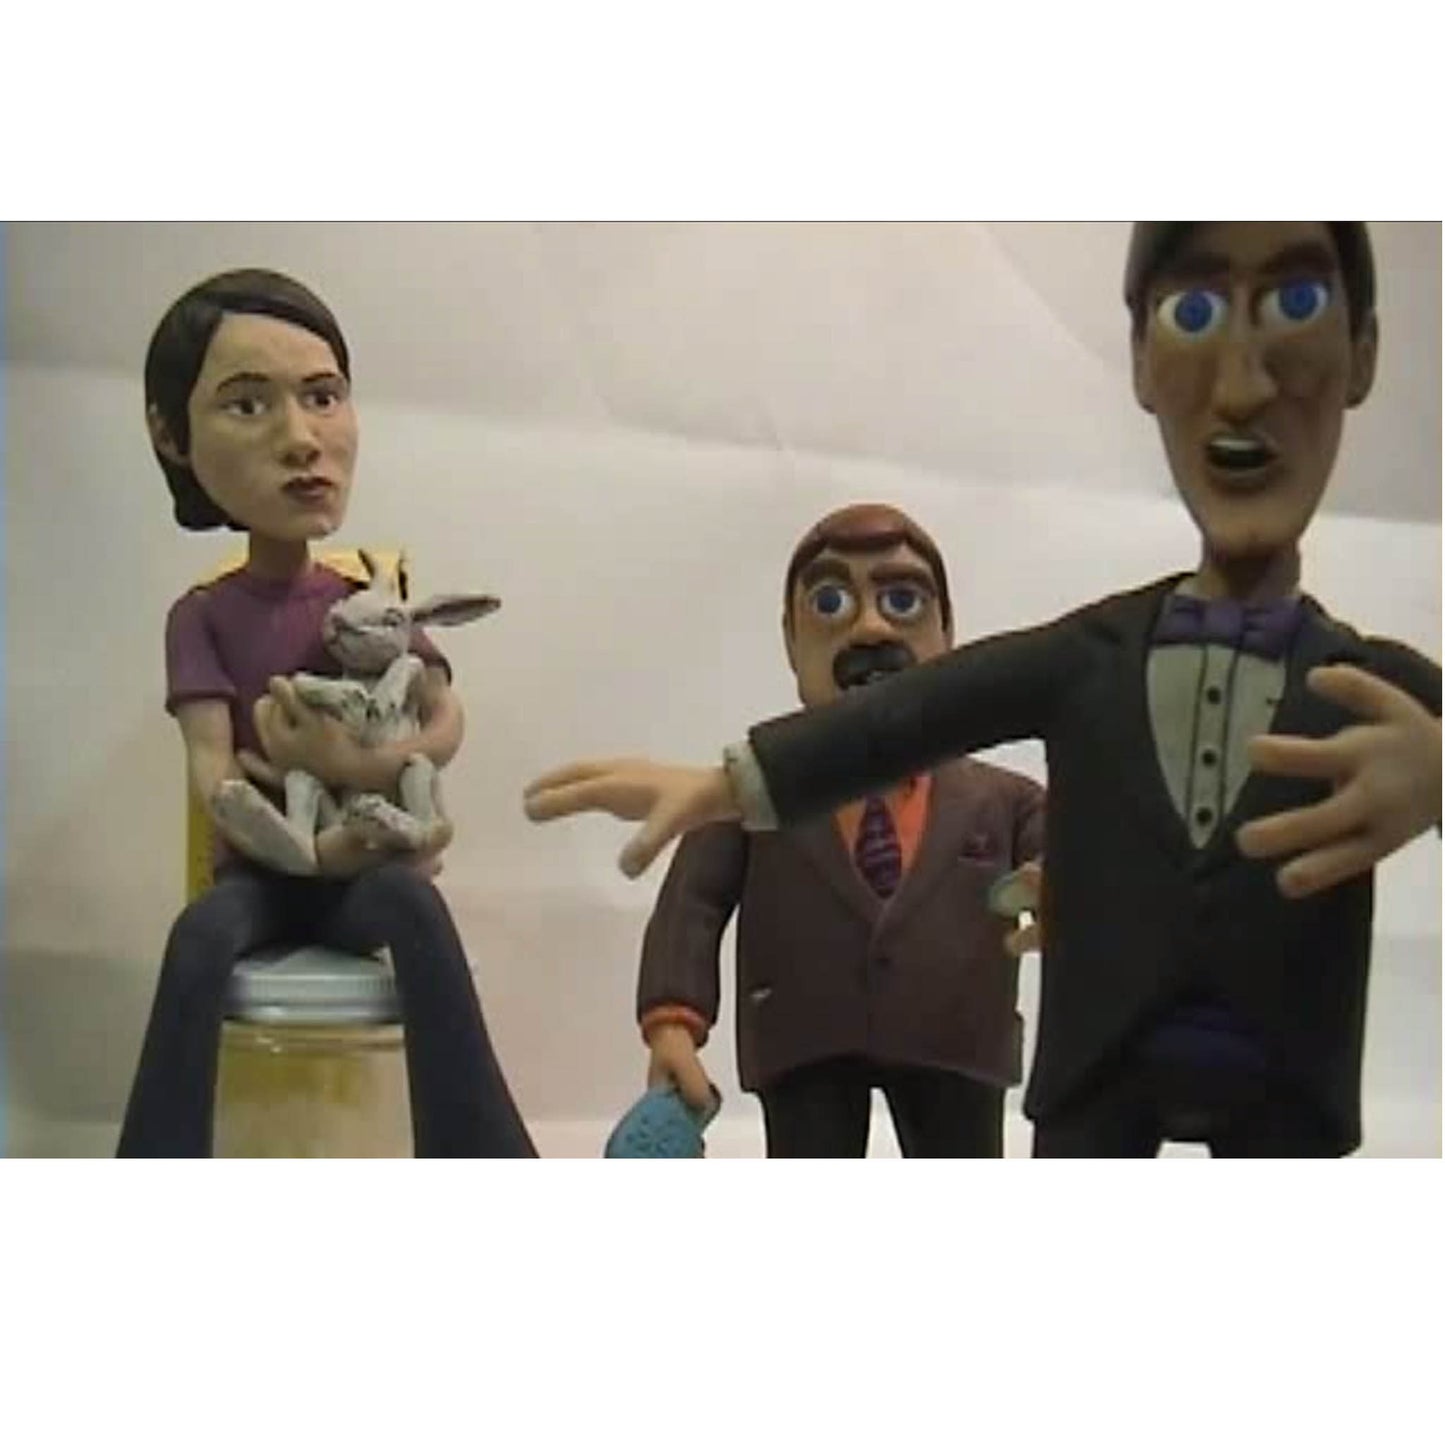 Three finished stop motion puppets made of foam latex, to of which are from MTV's Celebrity Deathmatch TV show.